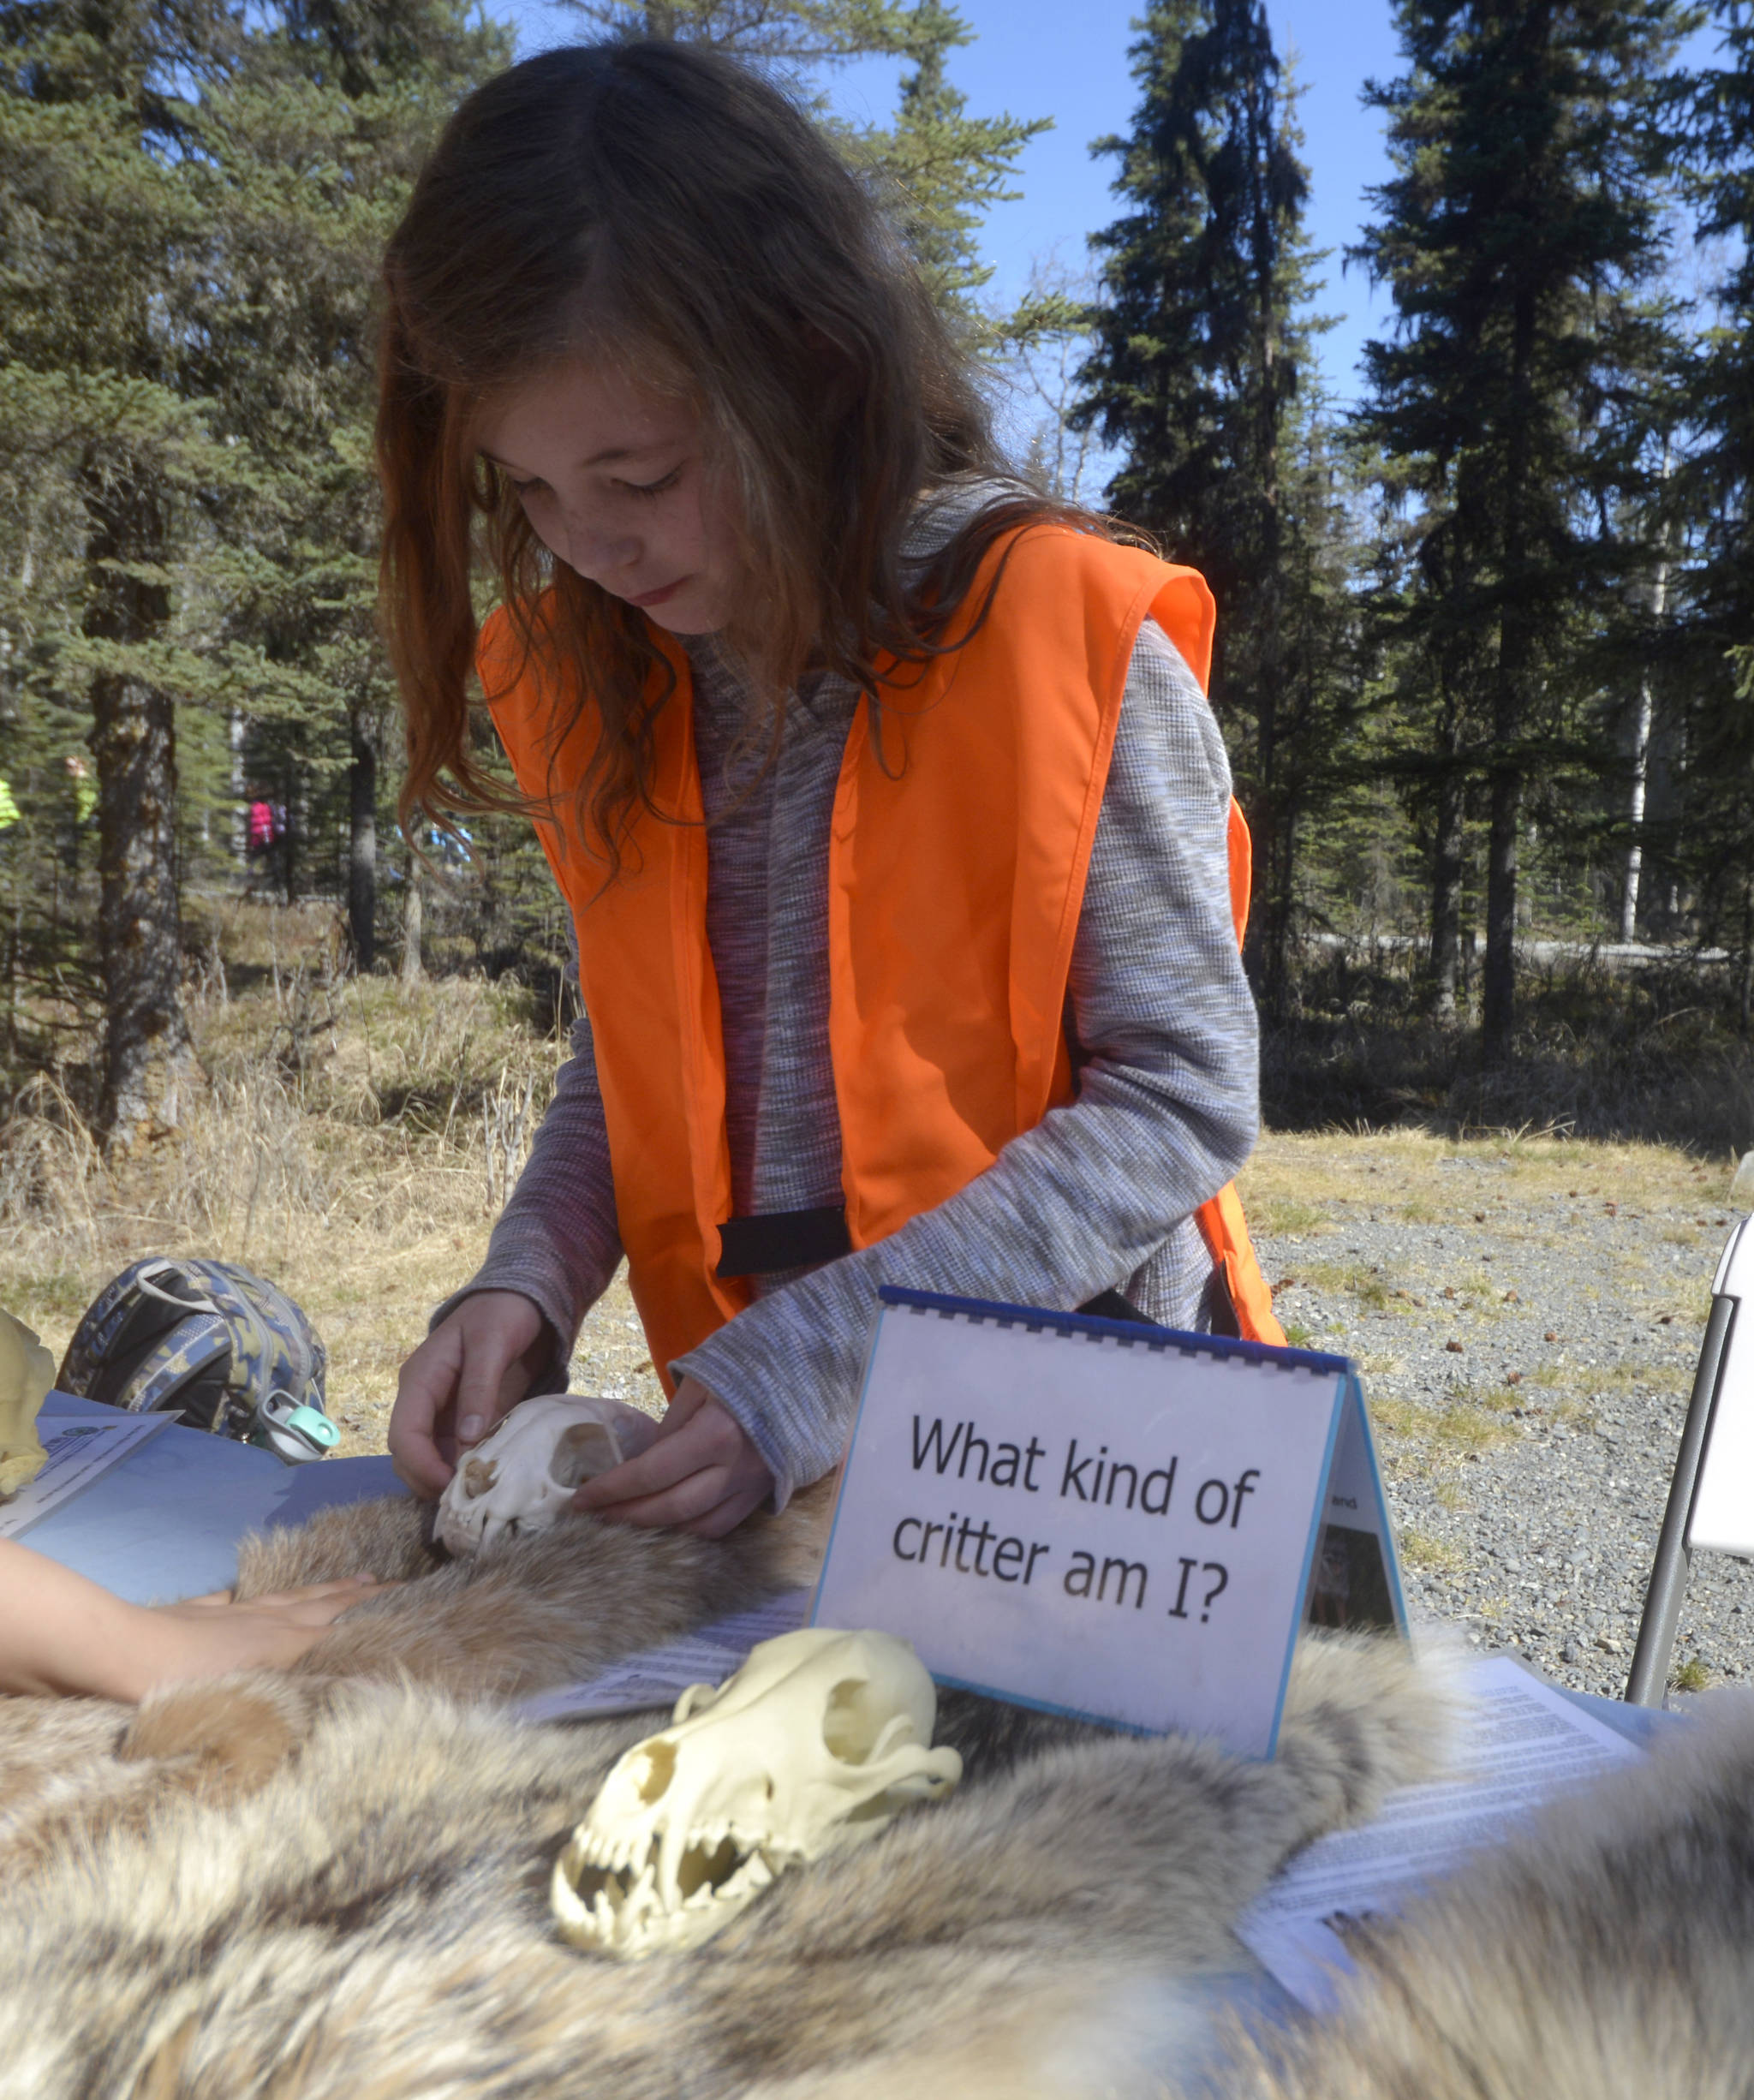 Allehya Roberts, a fifth grader from Sterling Elementary, helped other students identify different animal skulls and hides at the Salmon Celebration on Thursday, May 11, 2017 at Johnson Lake in Kasilof, Alaska. (Kat Sorensen/Peninsula Clarion)